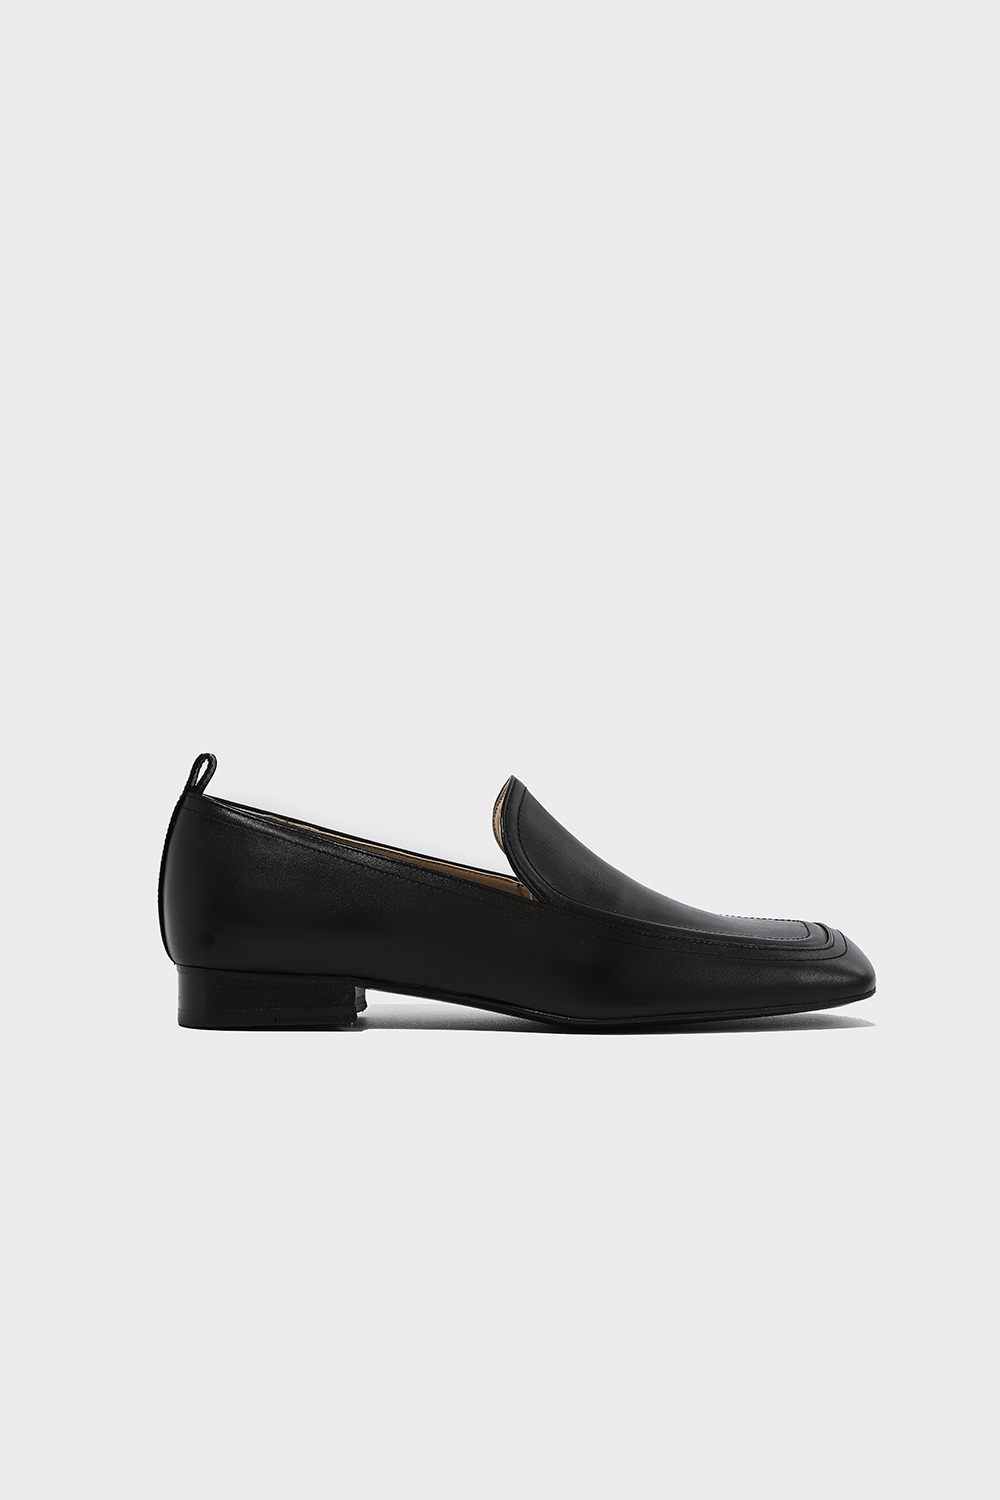 CLASSIC LOAFER - BLACK